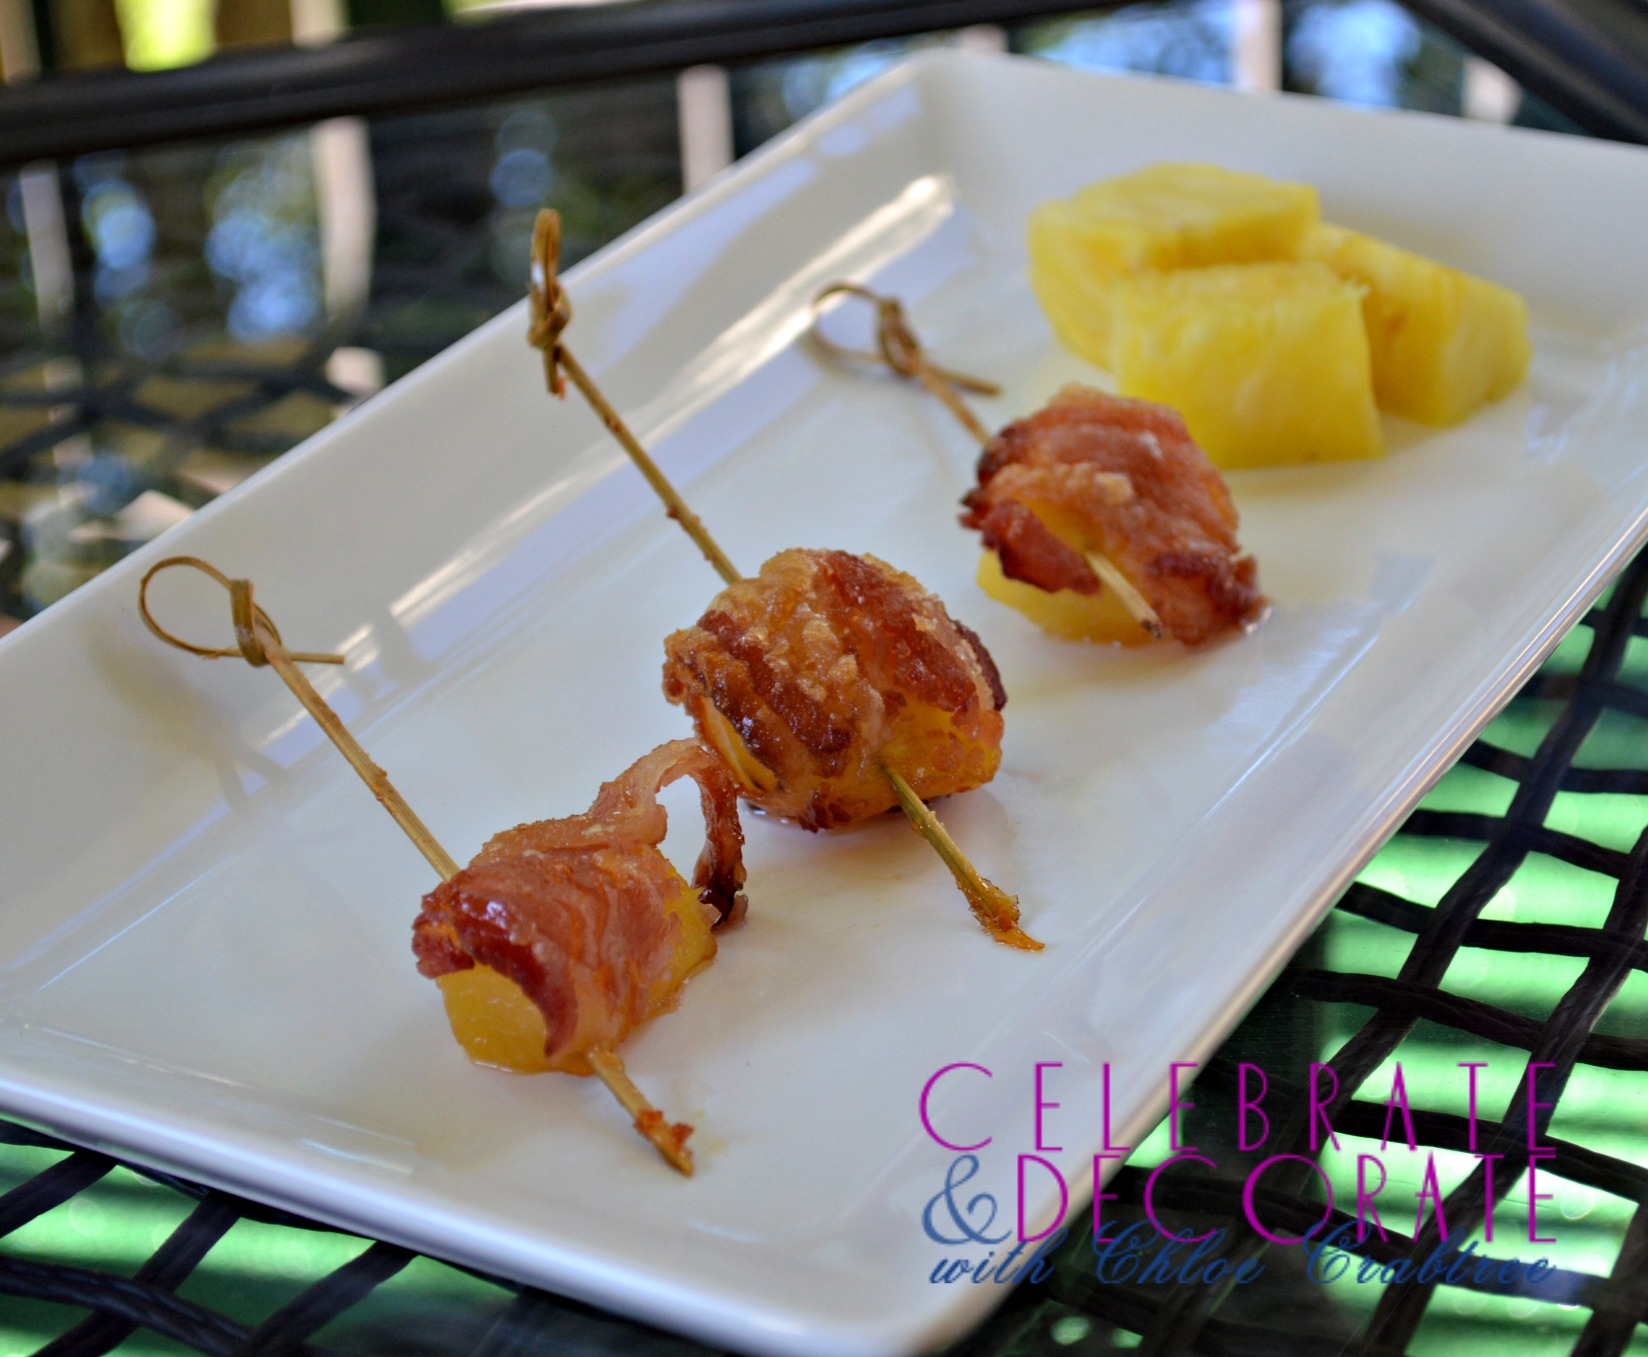 Pineapple wrapped with bacon